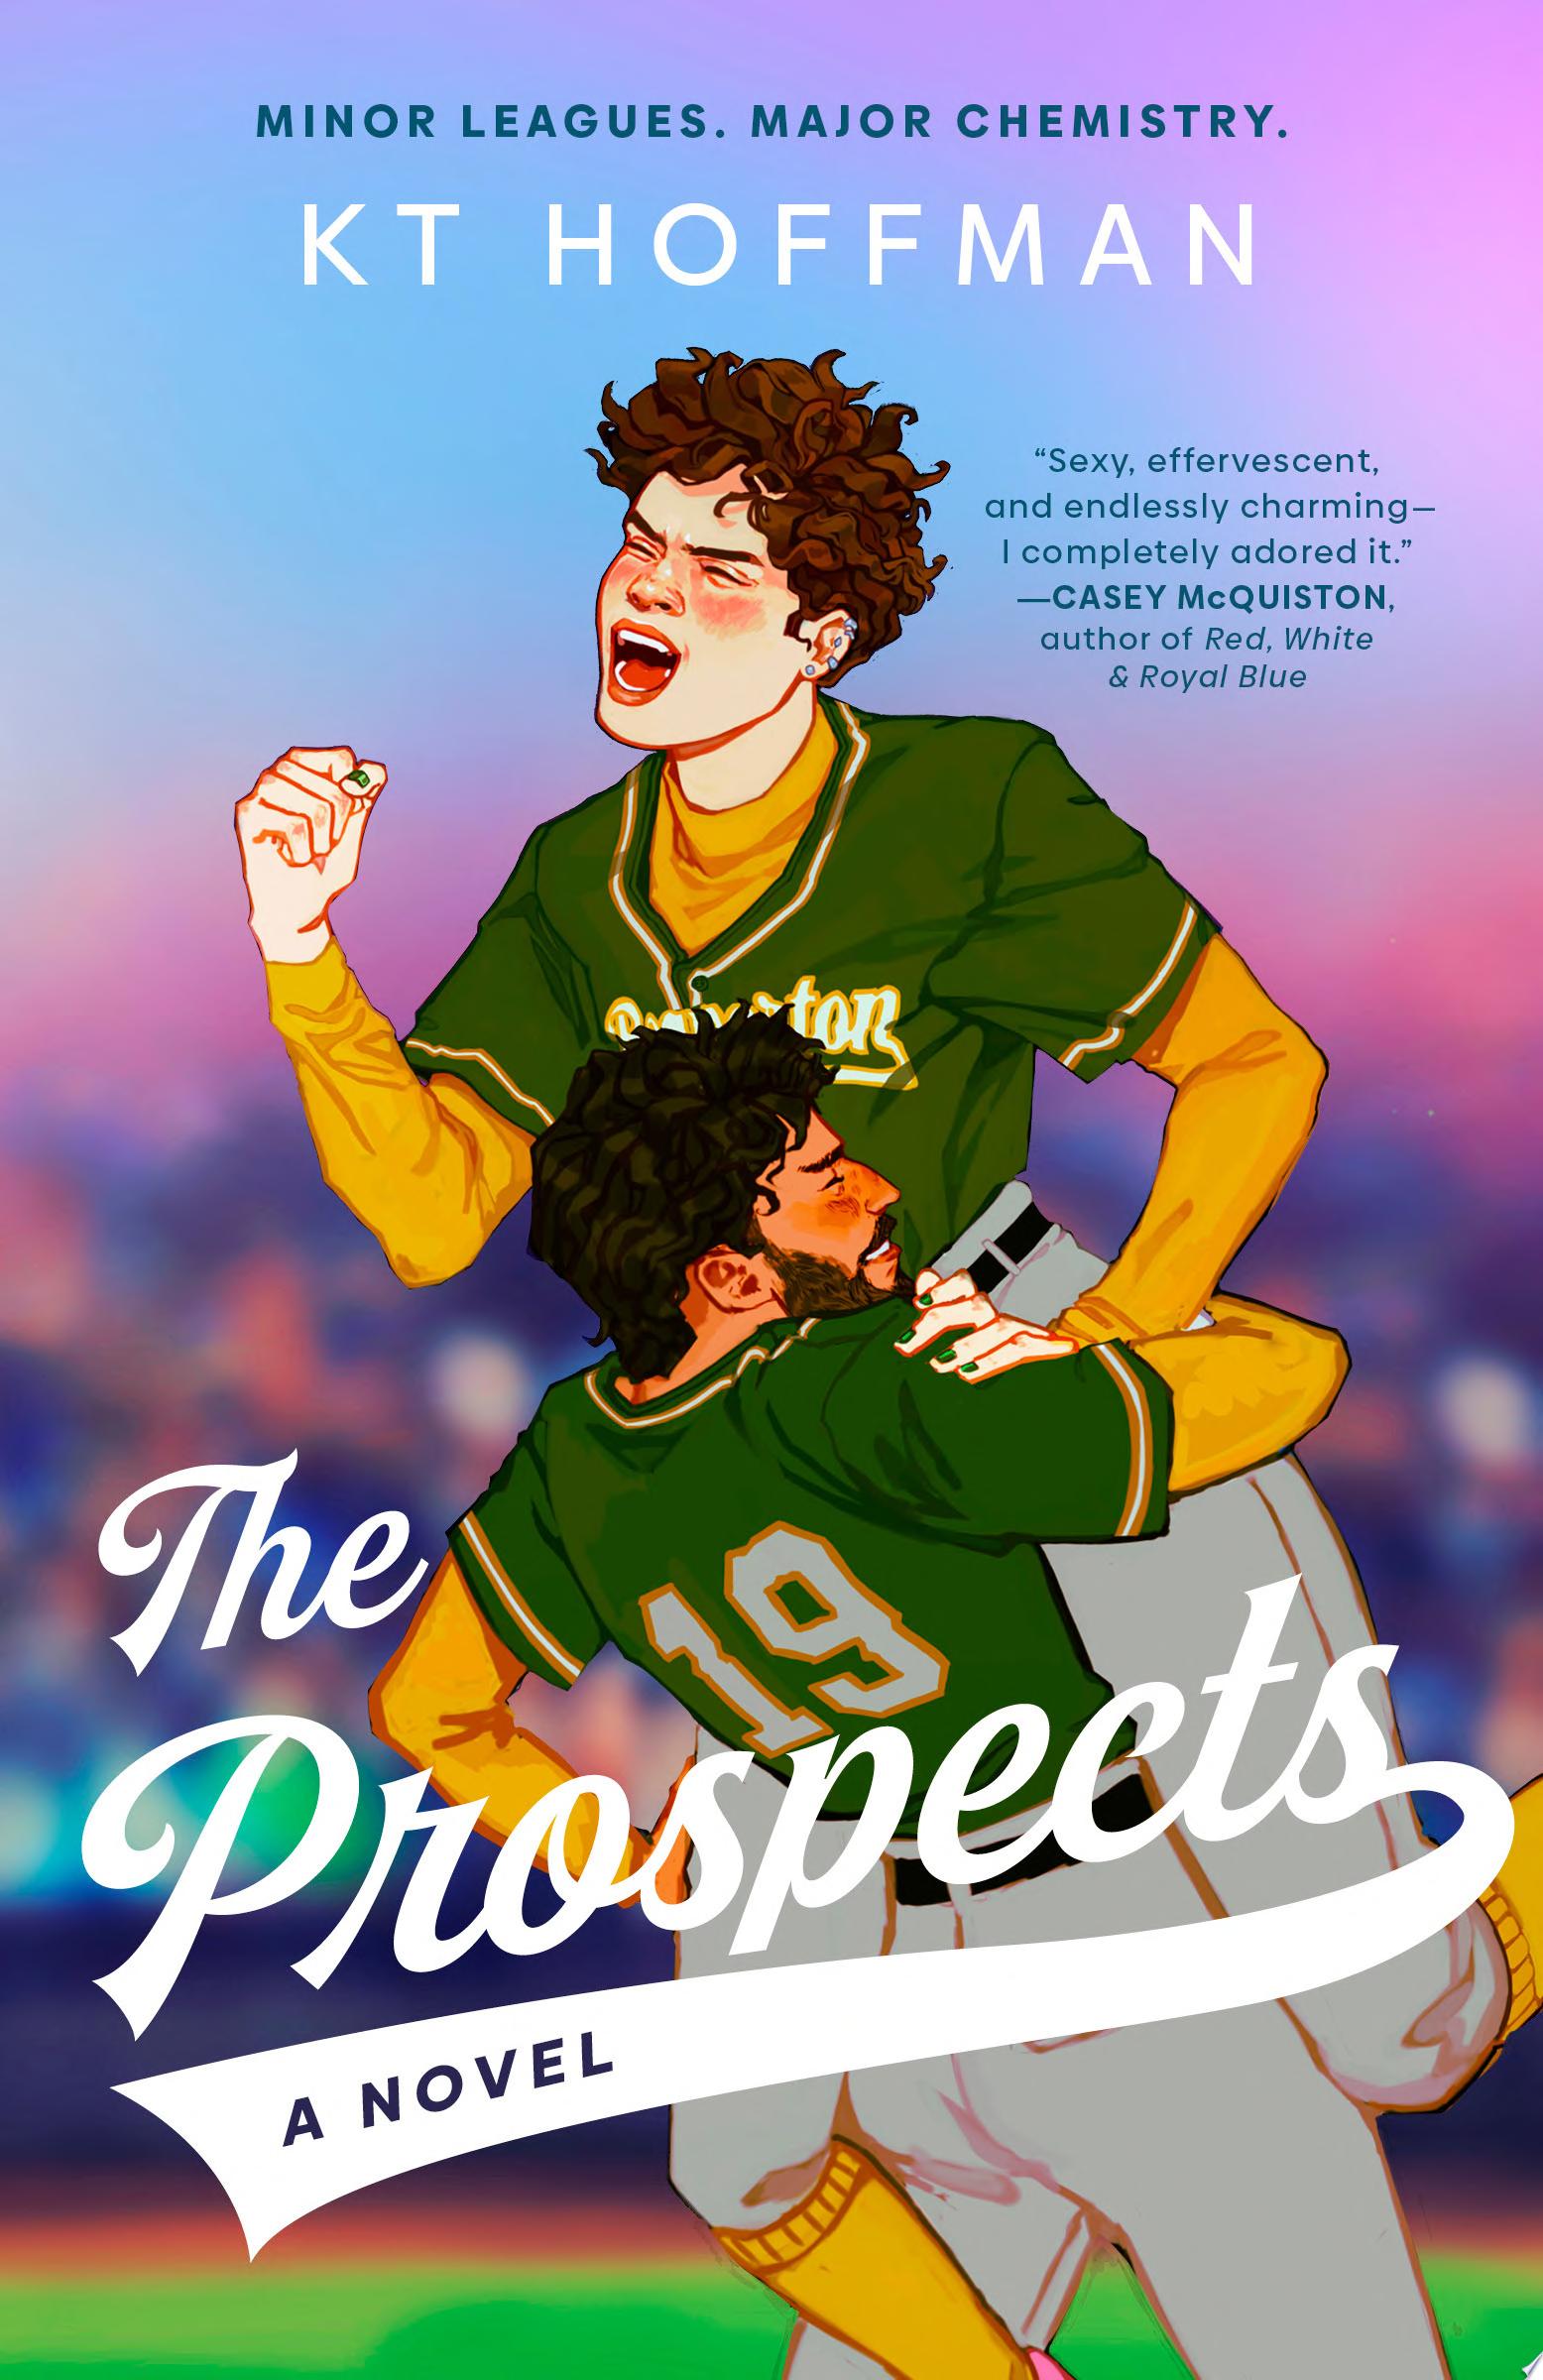 Image for "The Prospects"